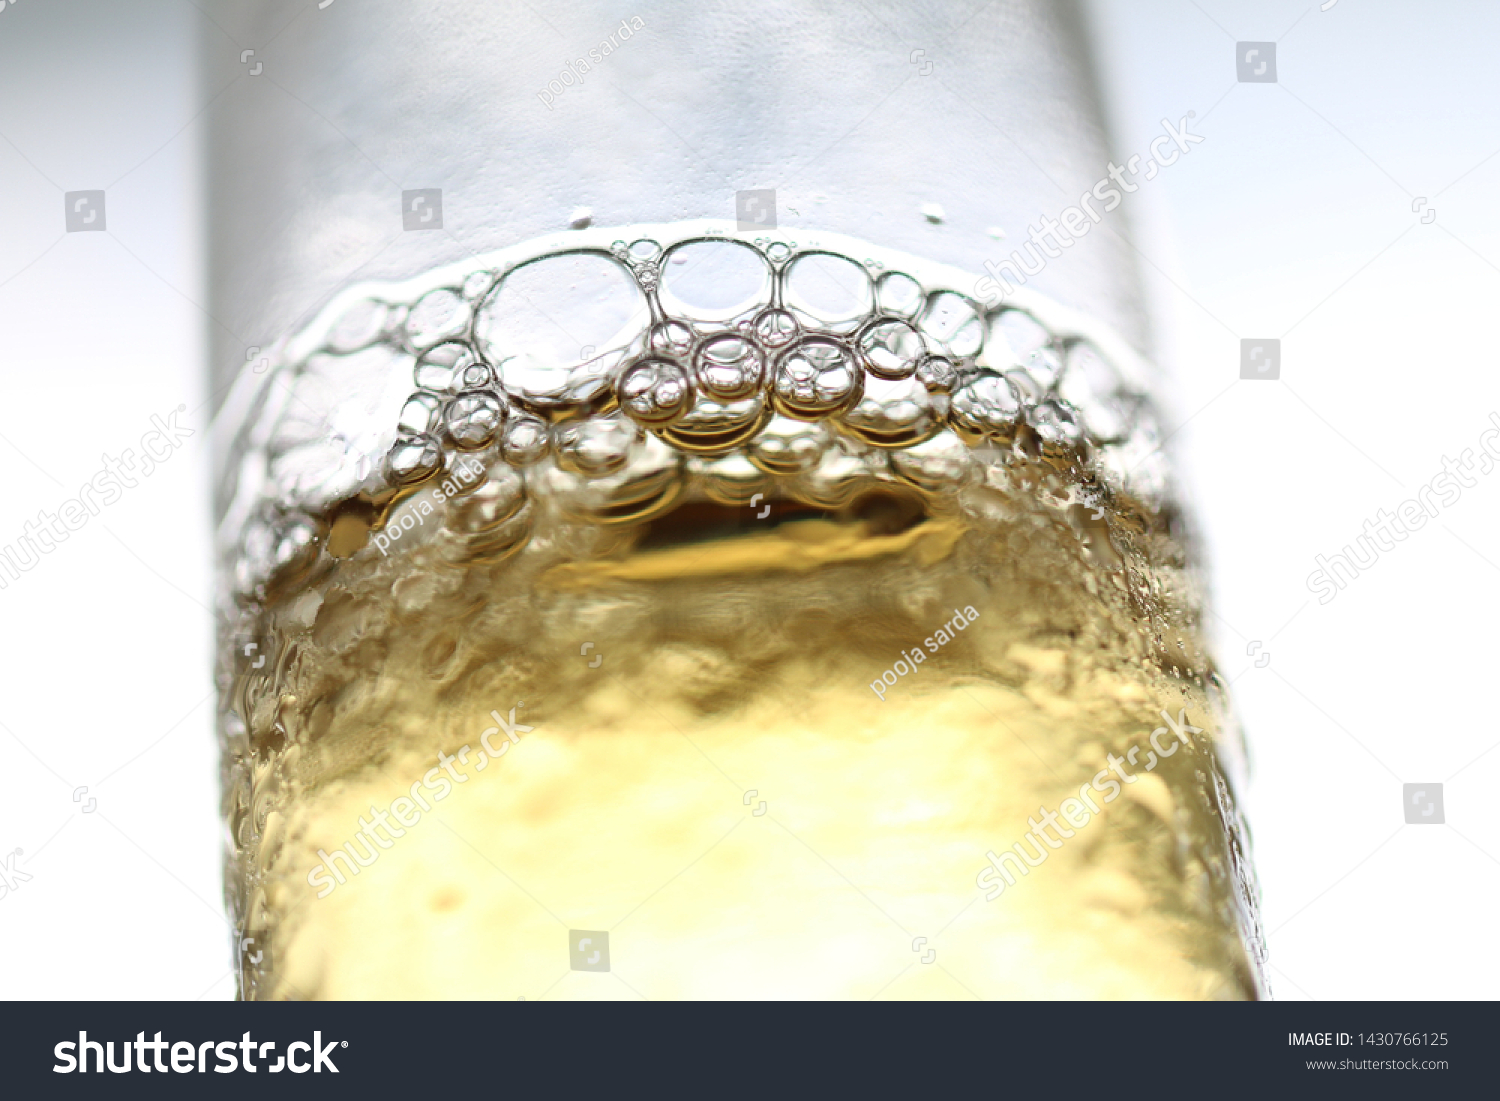 Download Bear Bottle Bubbles Yellow Colored Food And Drink Stock Image 1430766125 Yellowimages Mockups